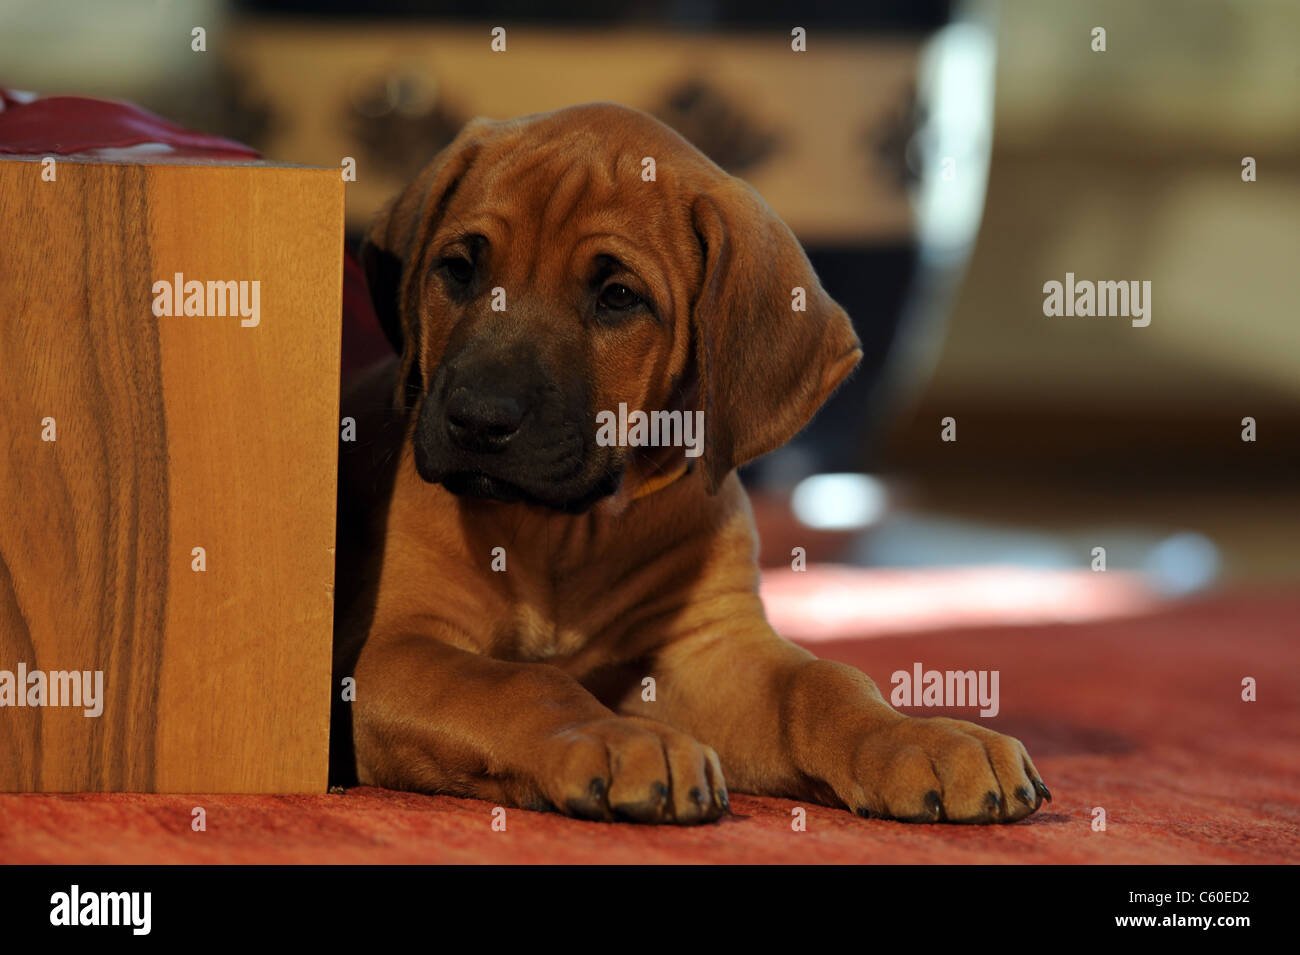 Rhodesian Ridgeback (Canis lupus familiaris). Puppy looking round the corner of a piece of furniture. Stock Photo